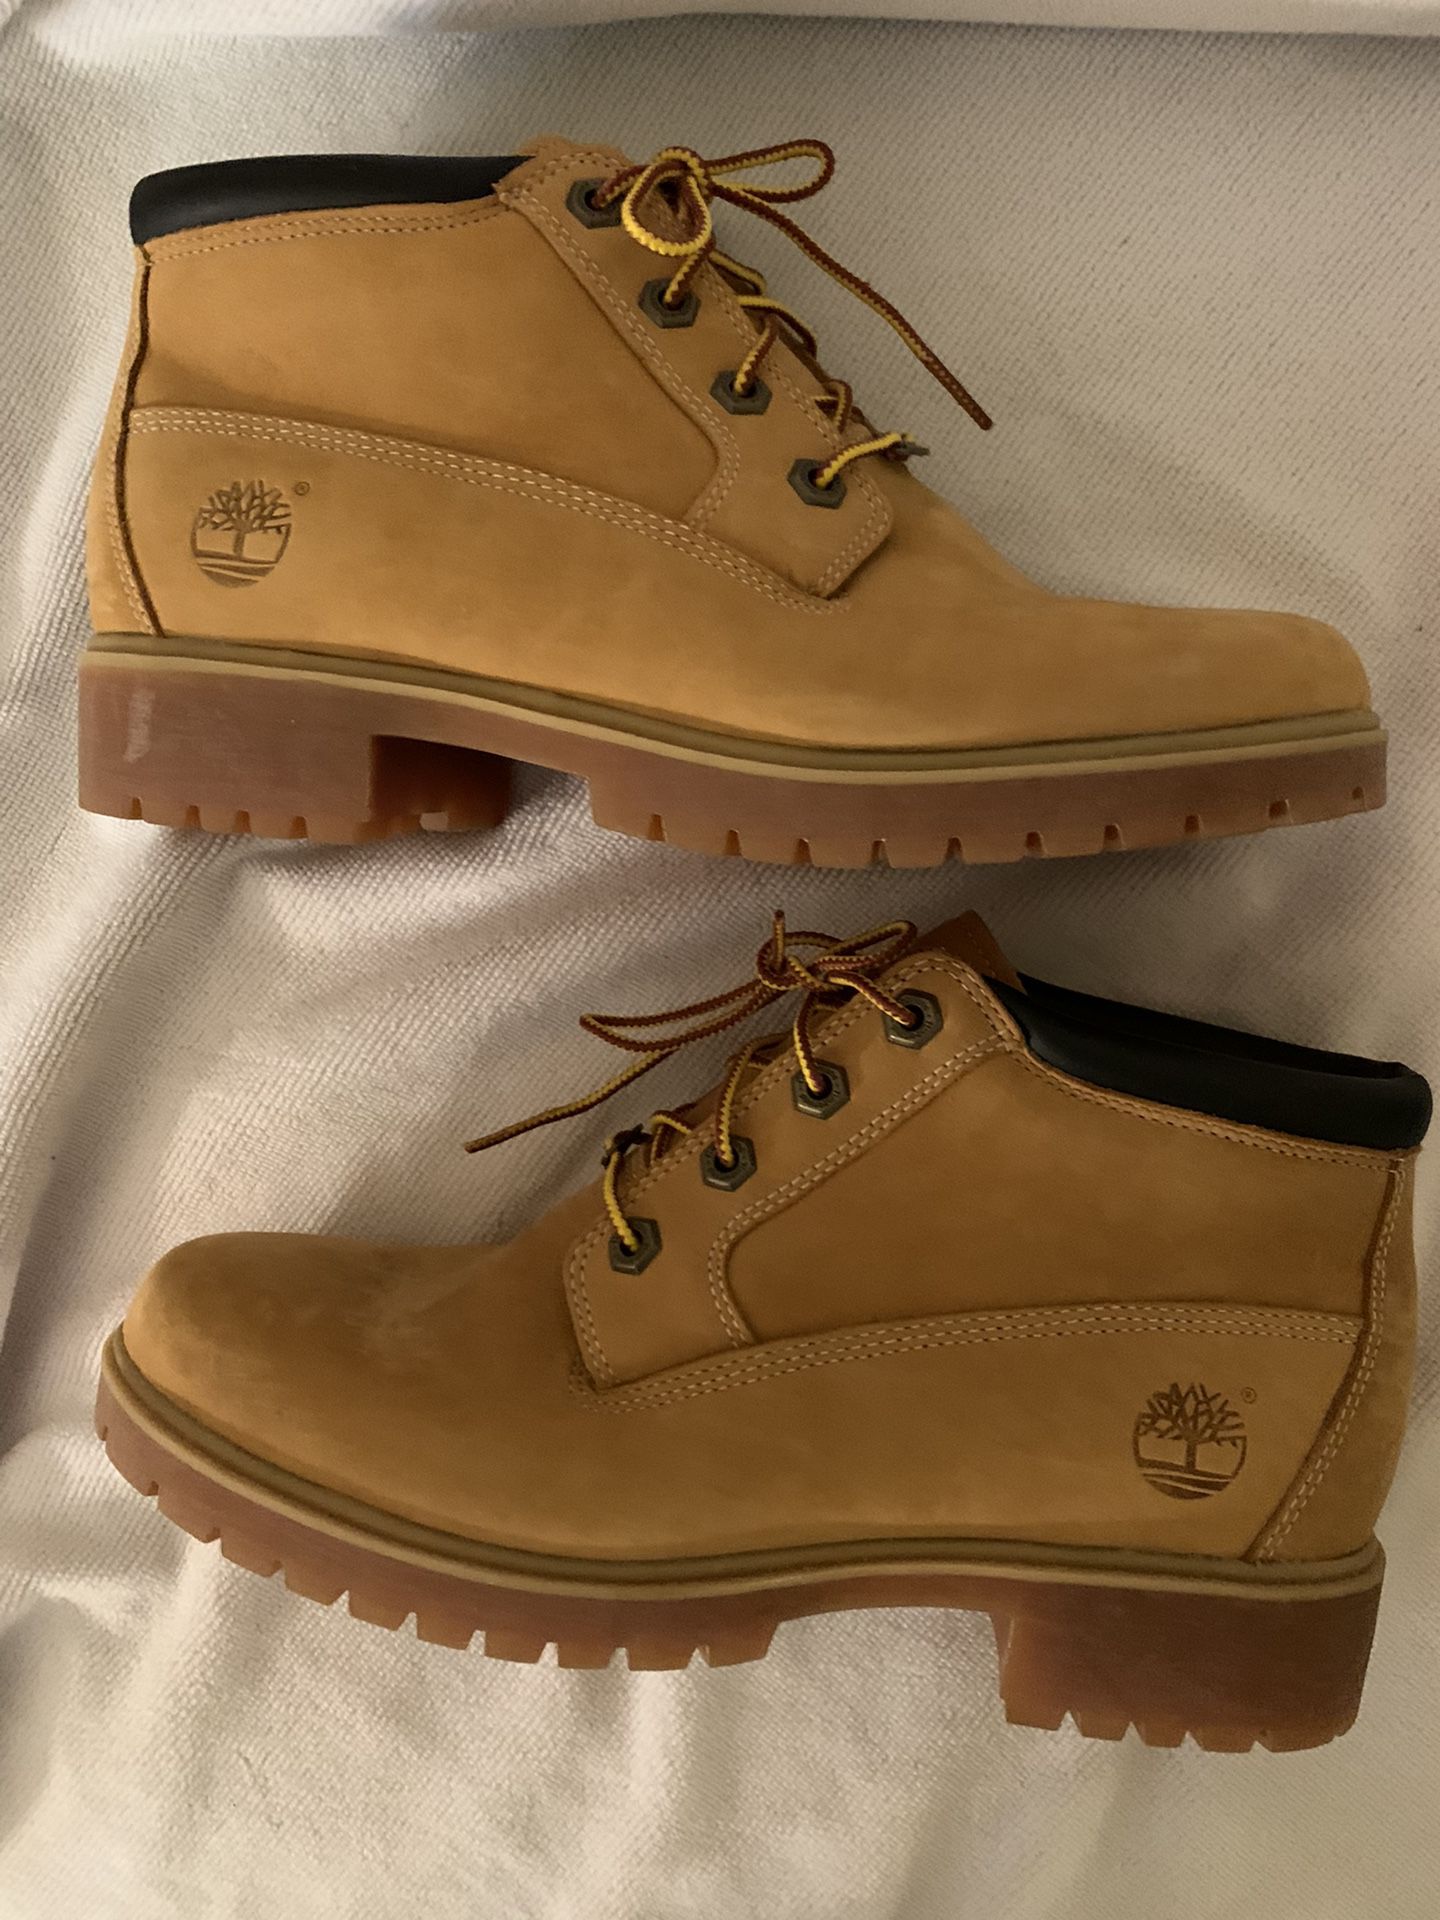 Timberland Boots Women’s 9 Barely Worn Maybe Once